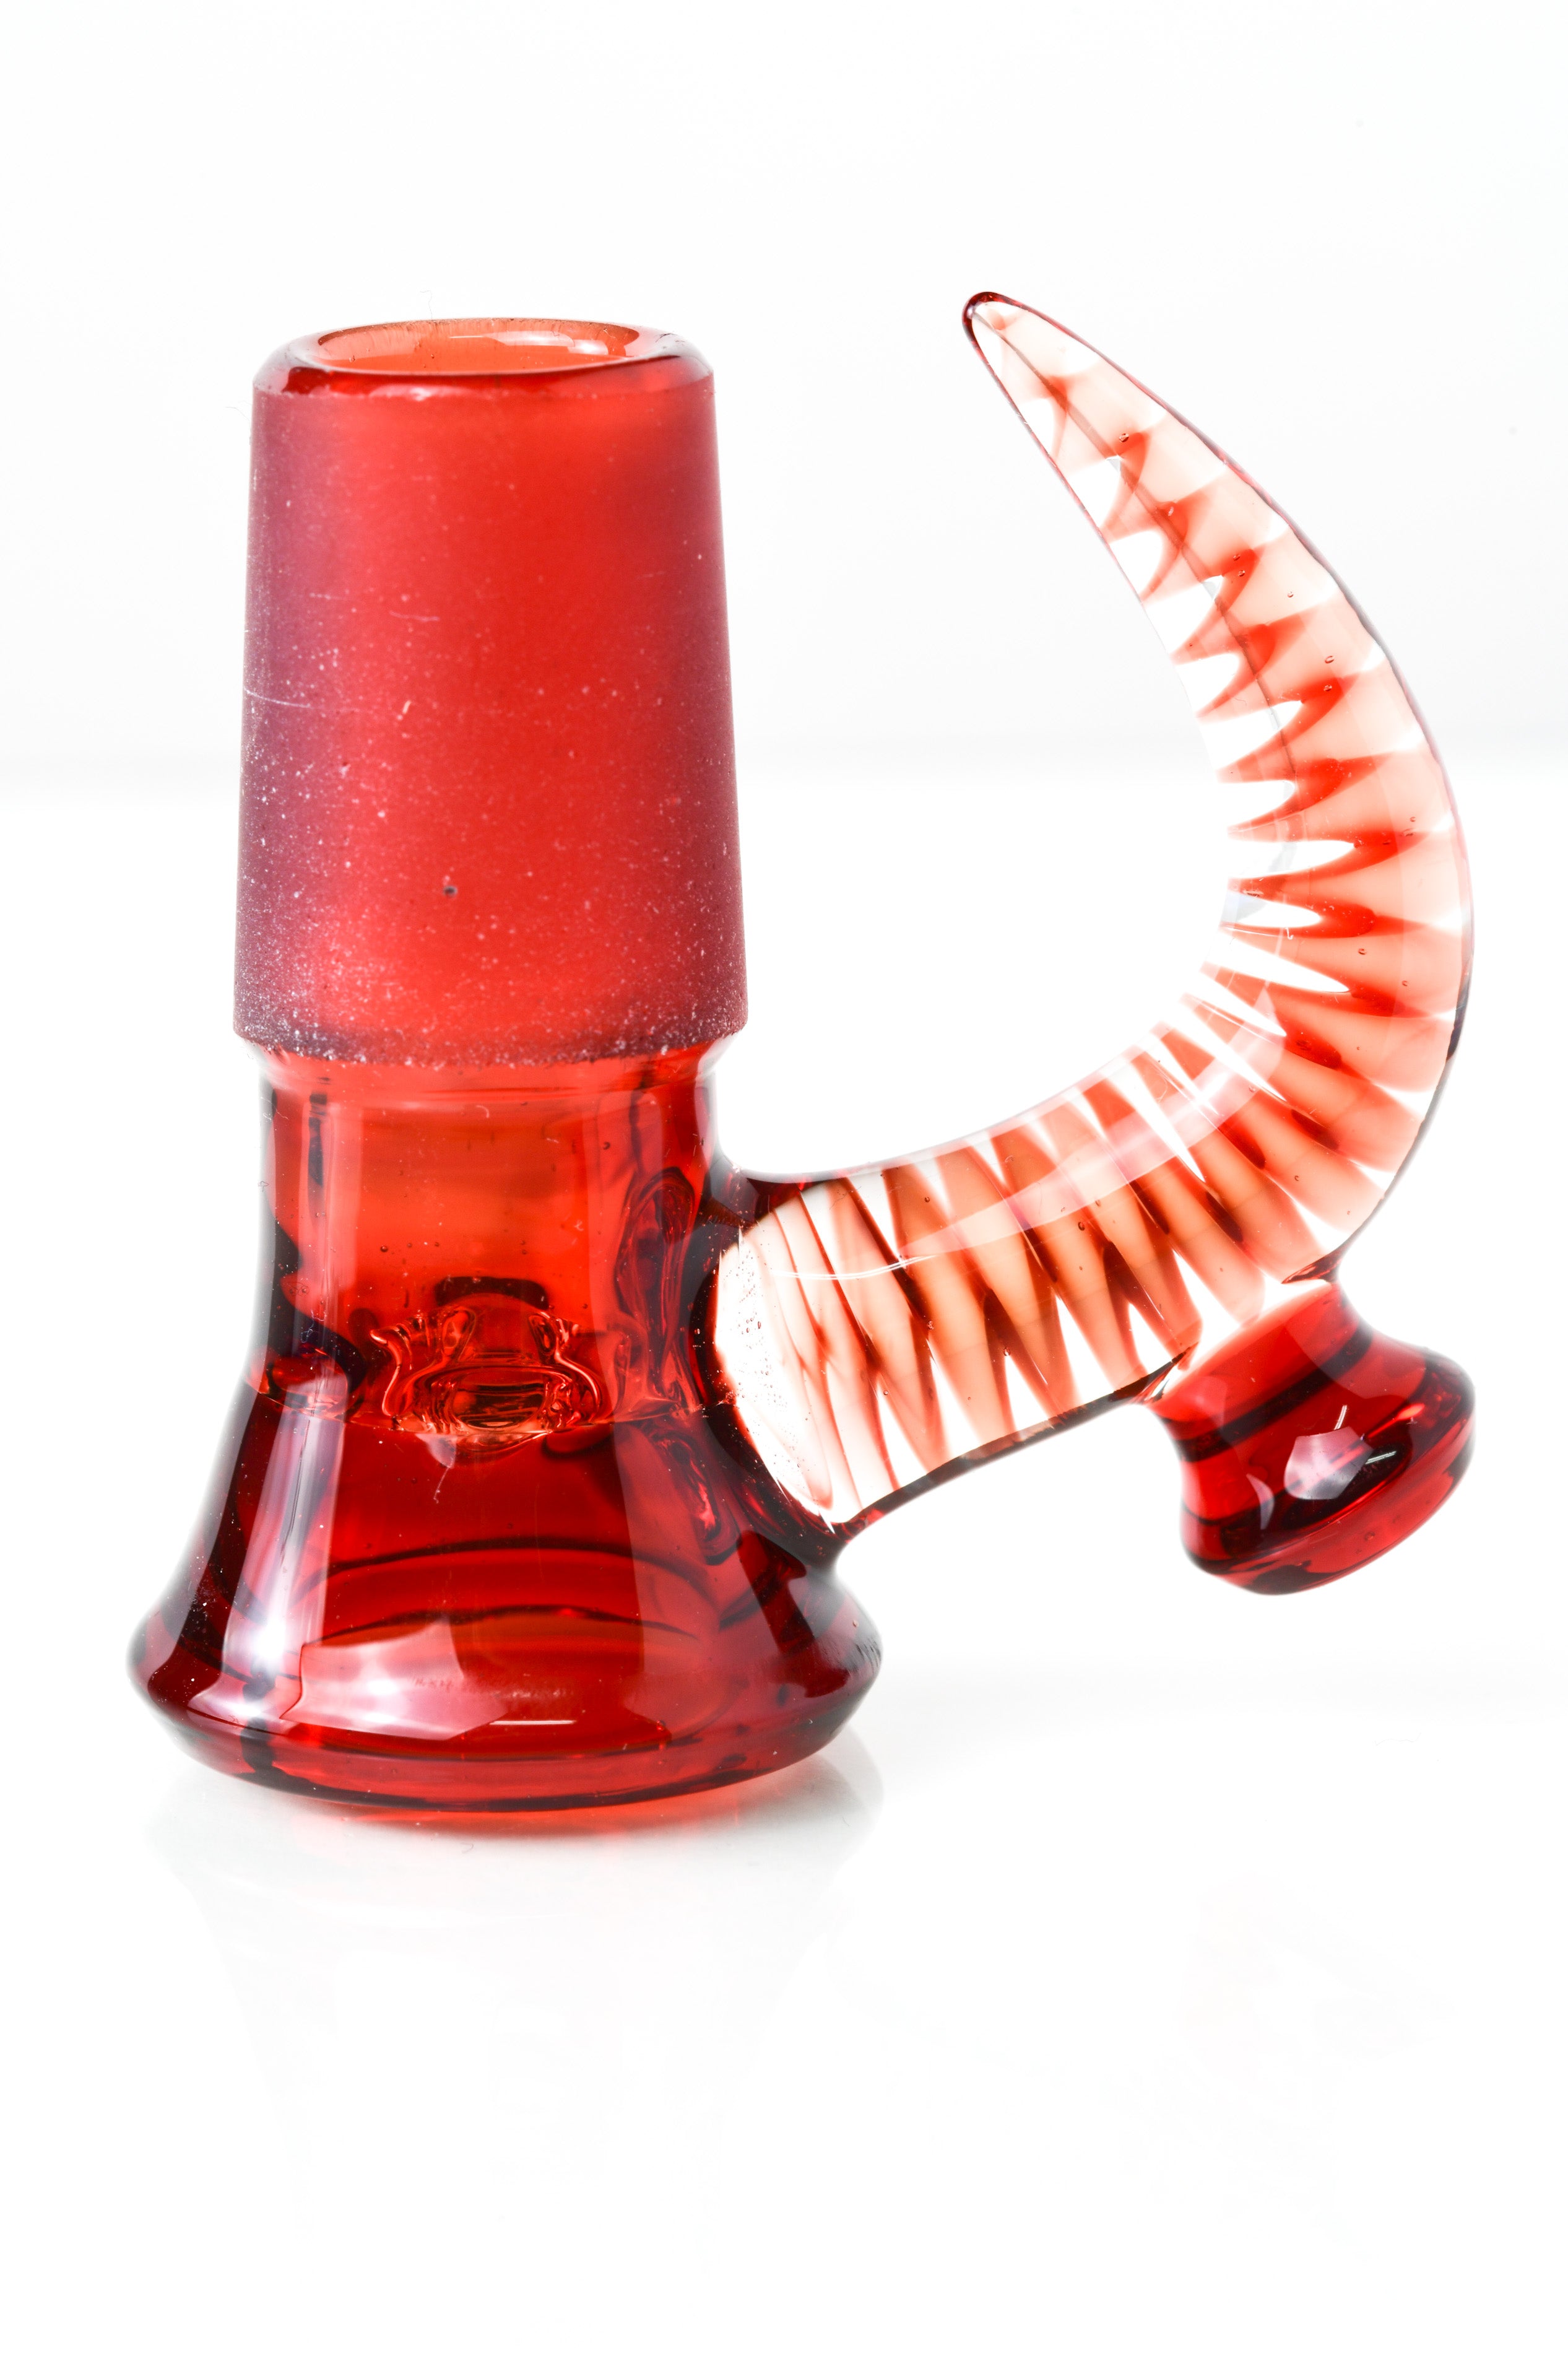 Jamms Glass - 18mm 4 Hole Fully Worked Slide W/ Cane Handle - Pomegranate